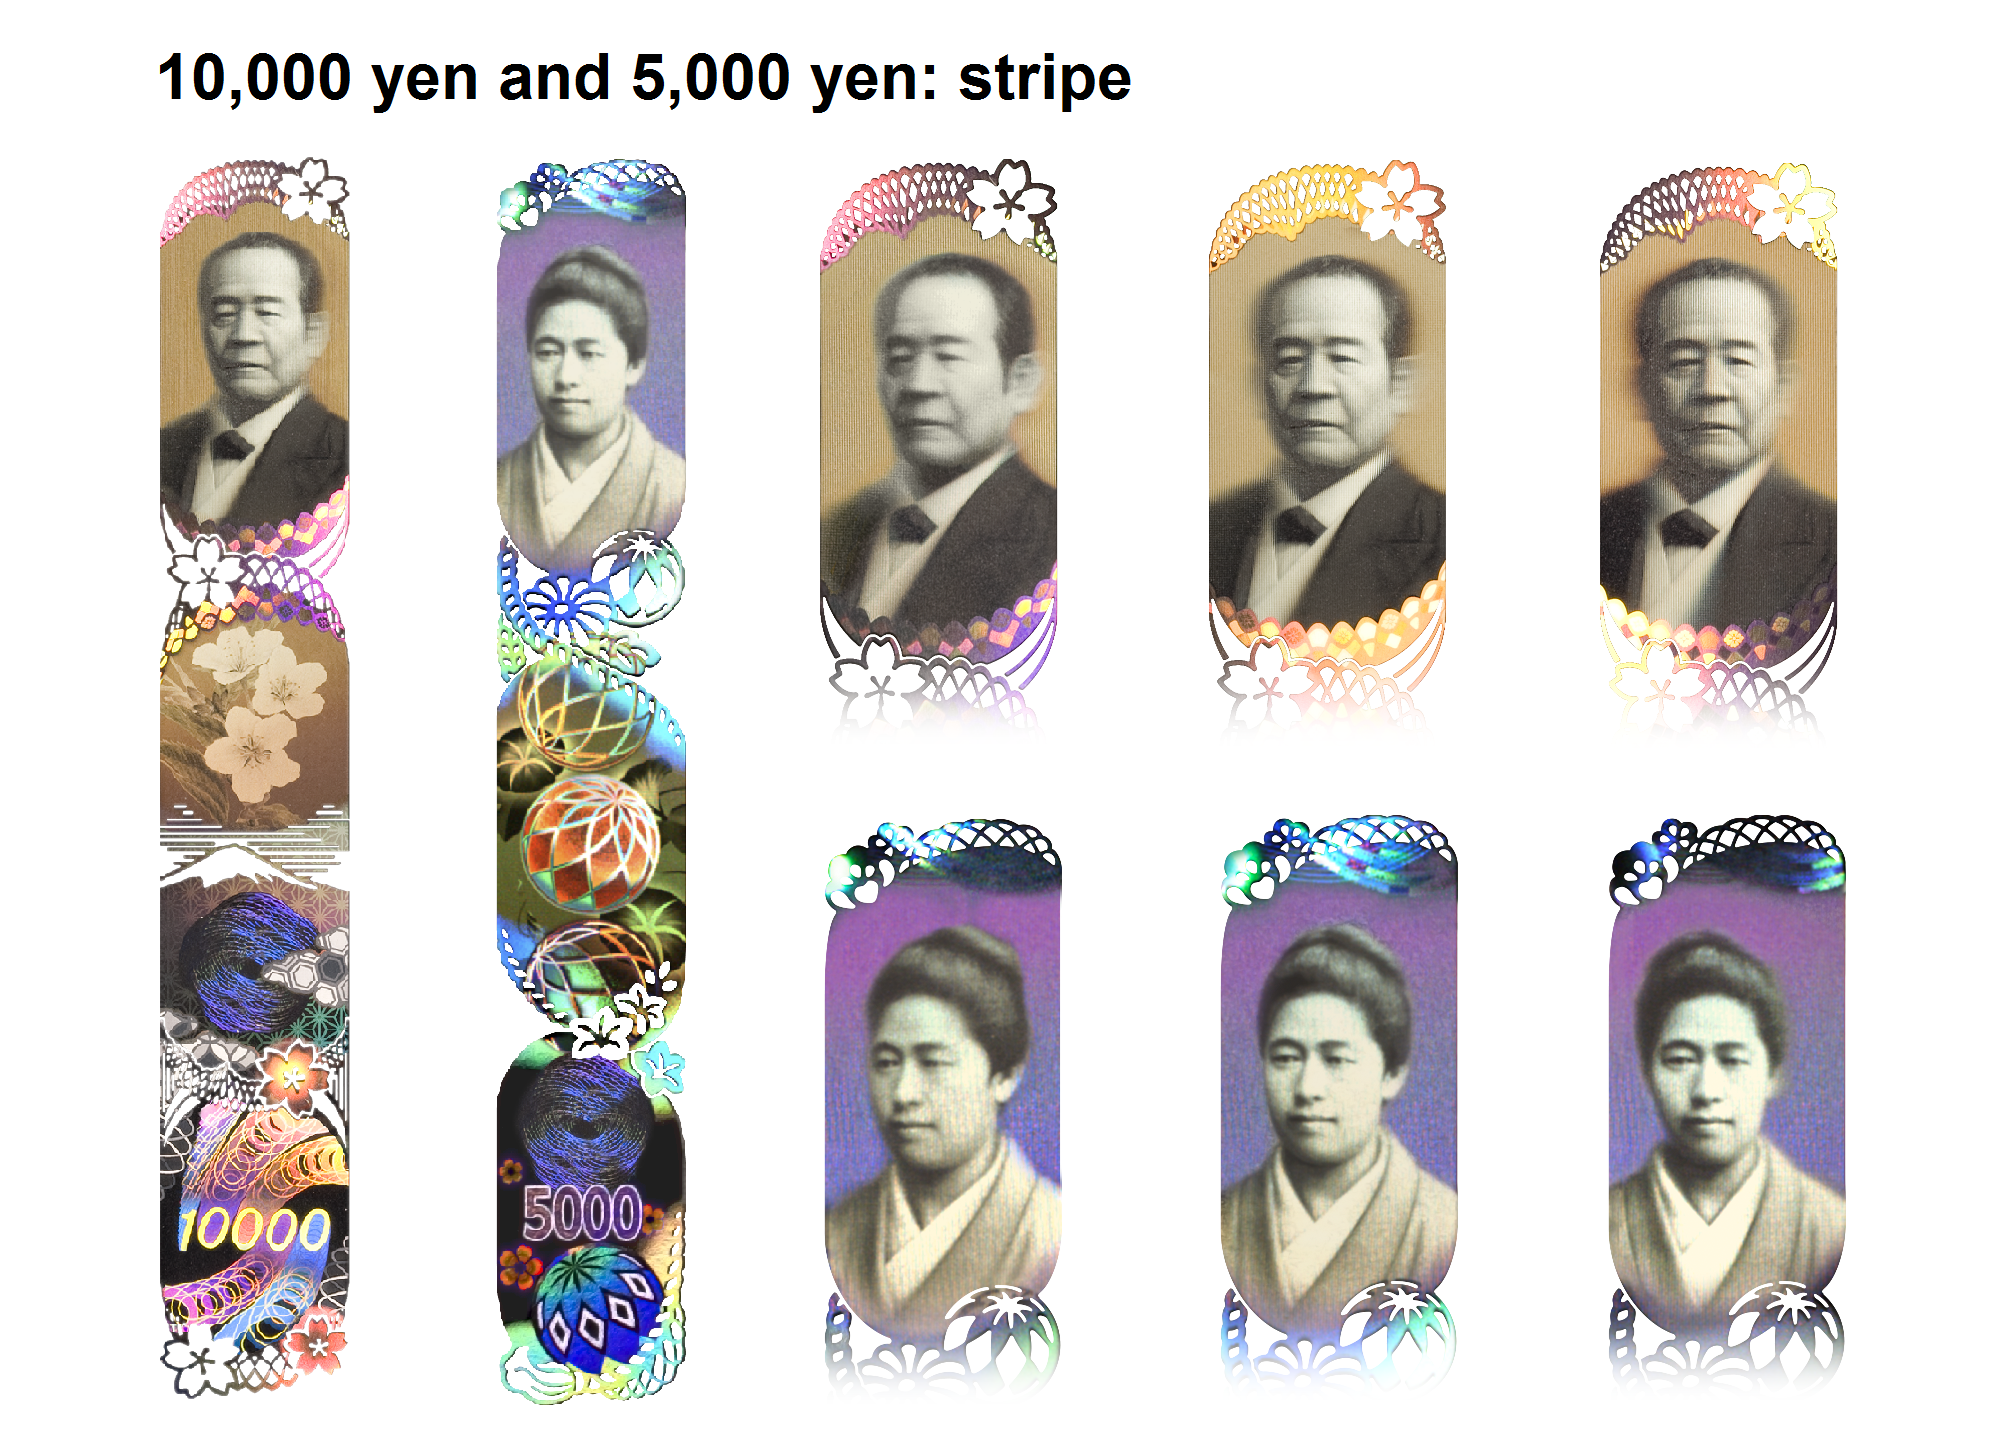 Images of the holographic stripes on the 10,000 yen and 5,000 yen notes, and close-ups of the rotating 3-D portraits at the top of the stripes on the 10,000 yen and 5,000 yen notes, which can be seen when tilted left to right.